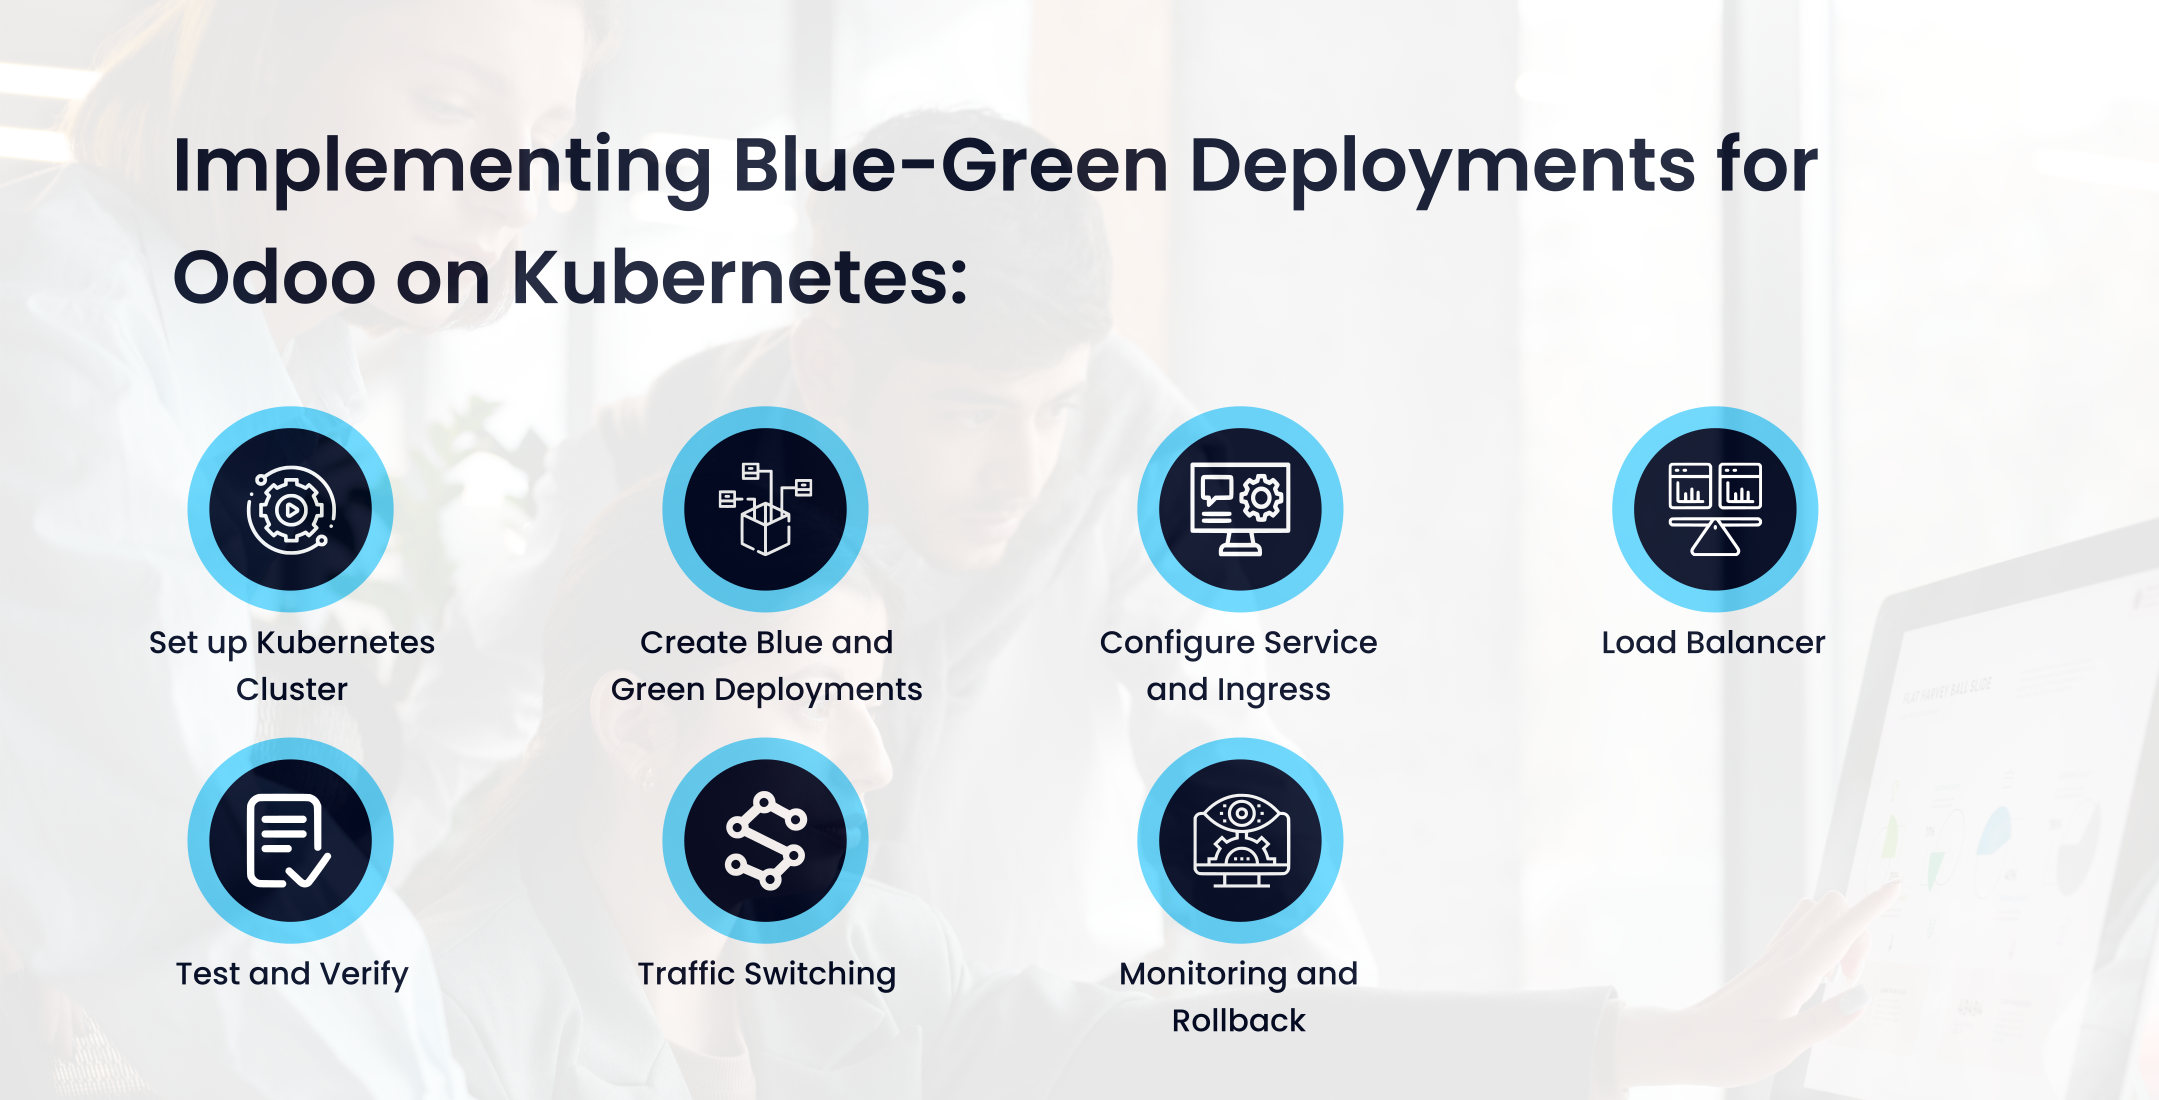 Implementing Blue-Green Deployments for Odoo on Kubernetes